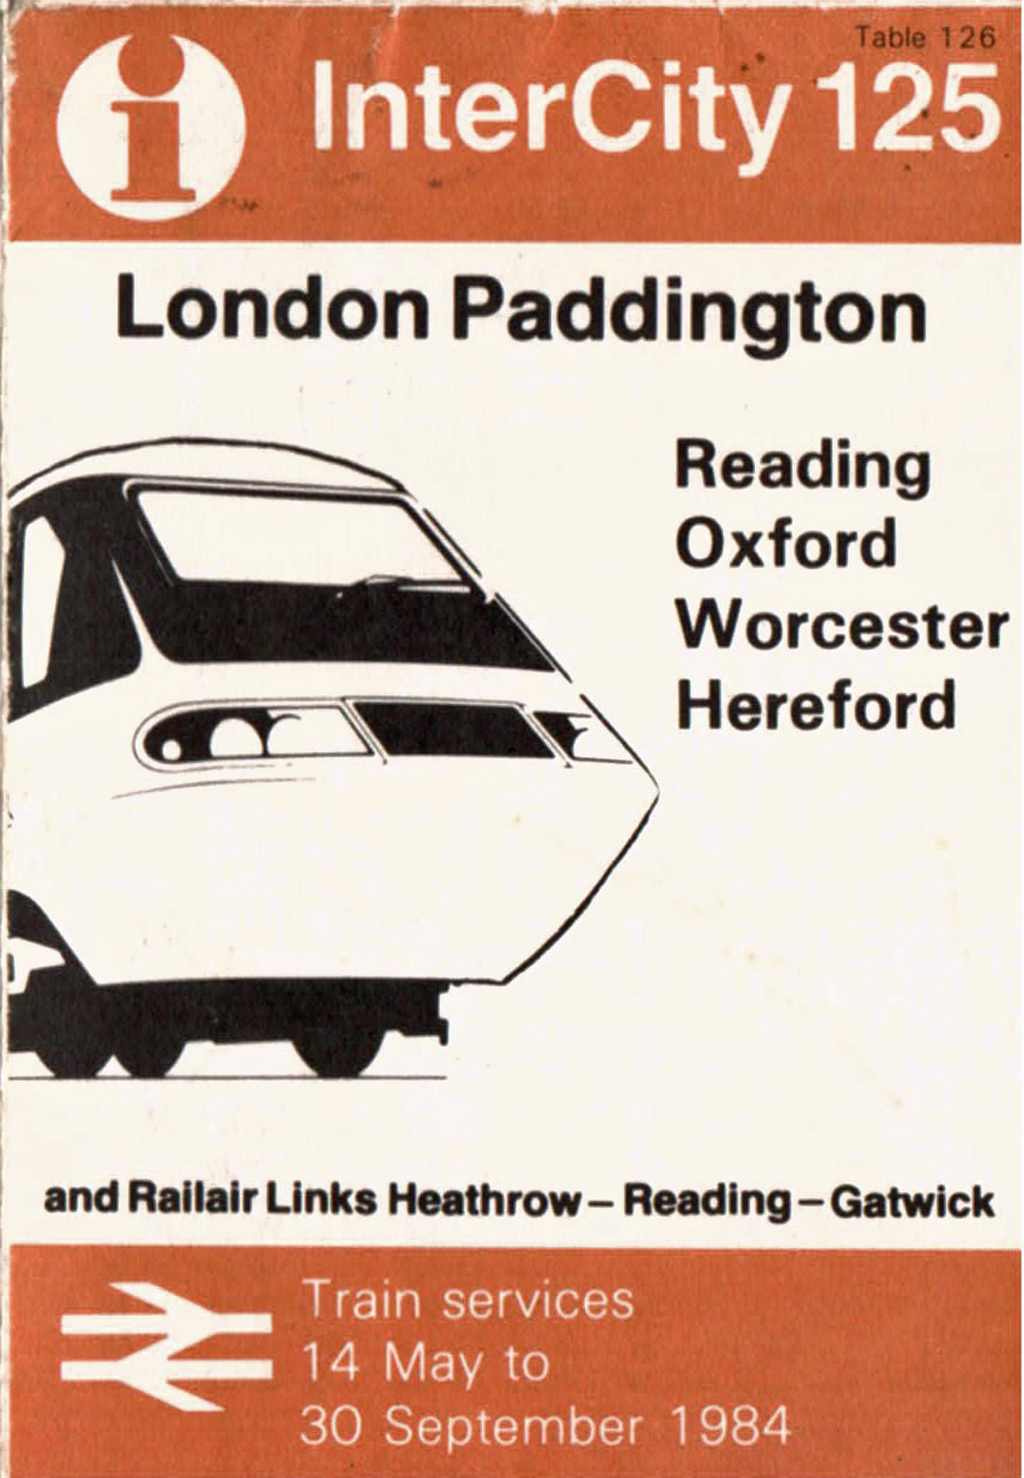 London 1984 timetable cover